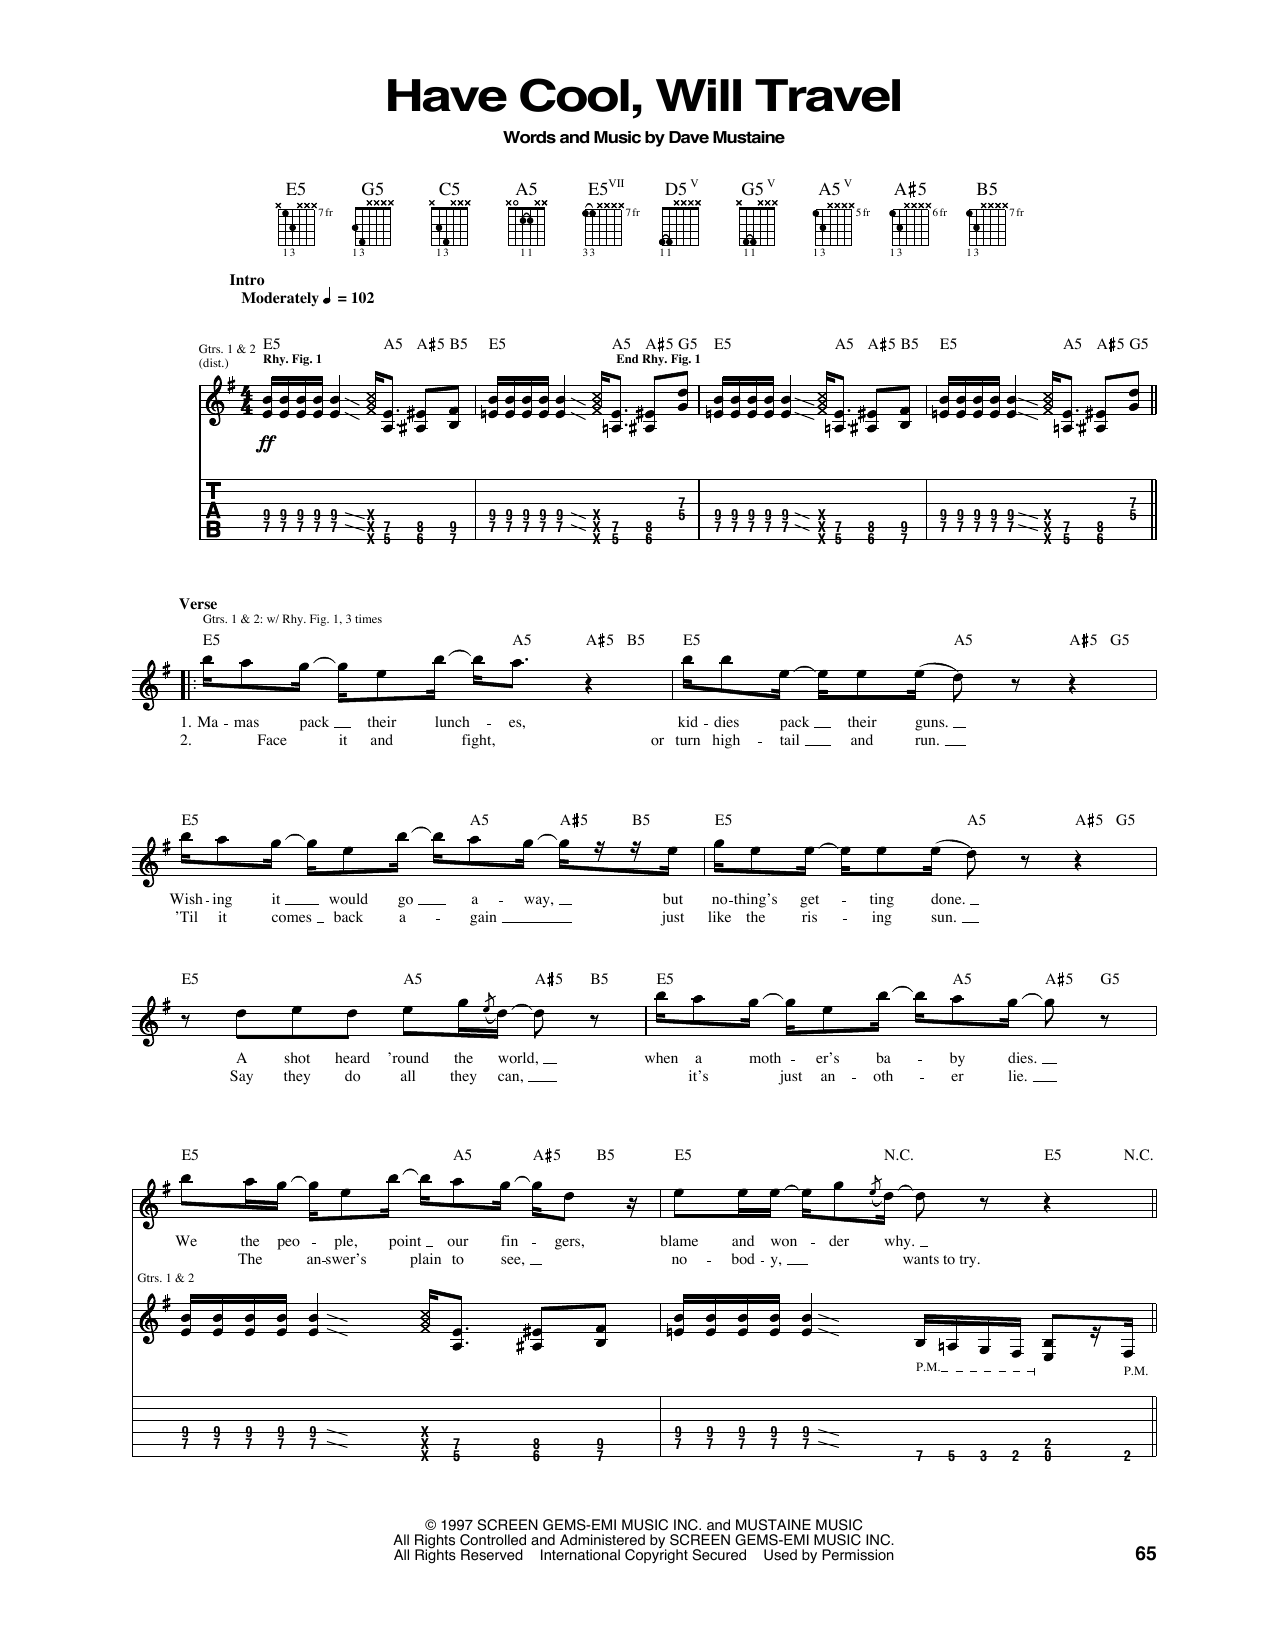 Download Megadeth Have Cool, Will Travel Sheet Music